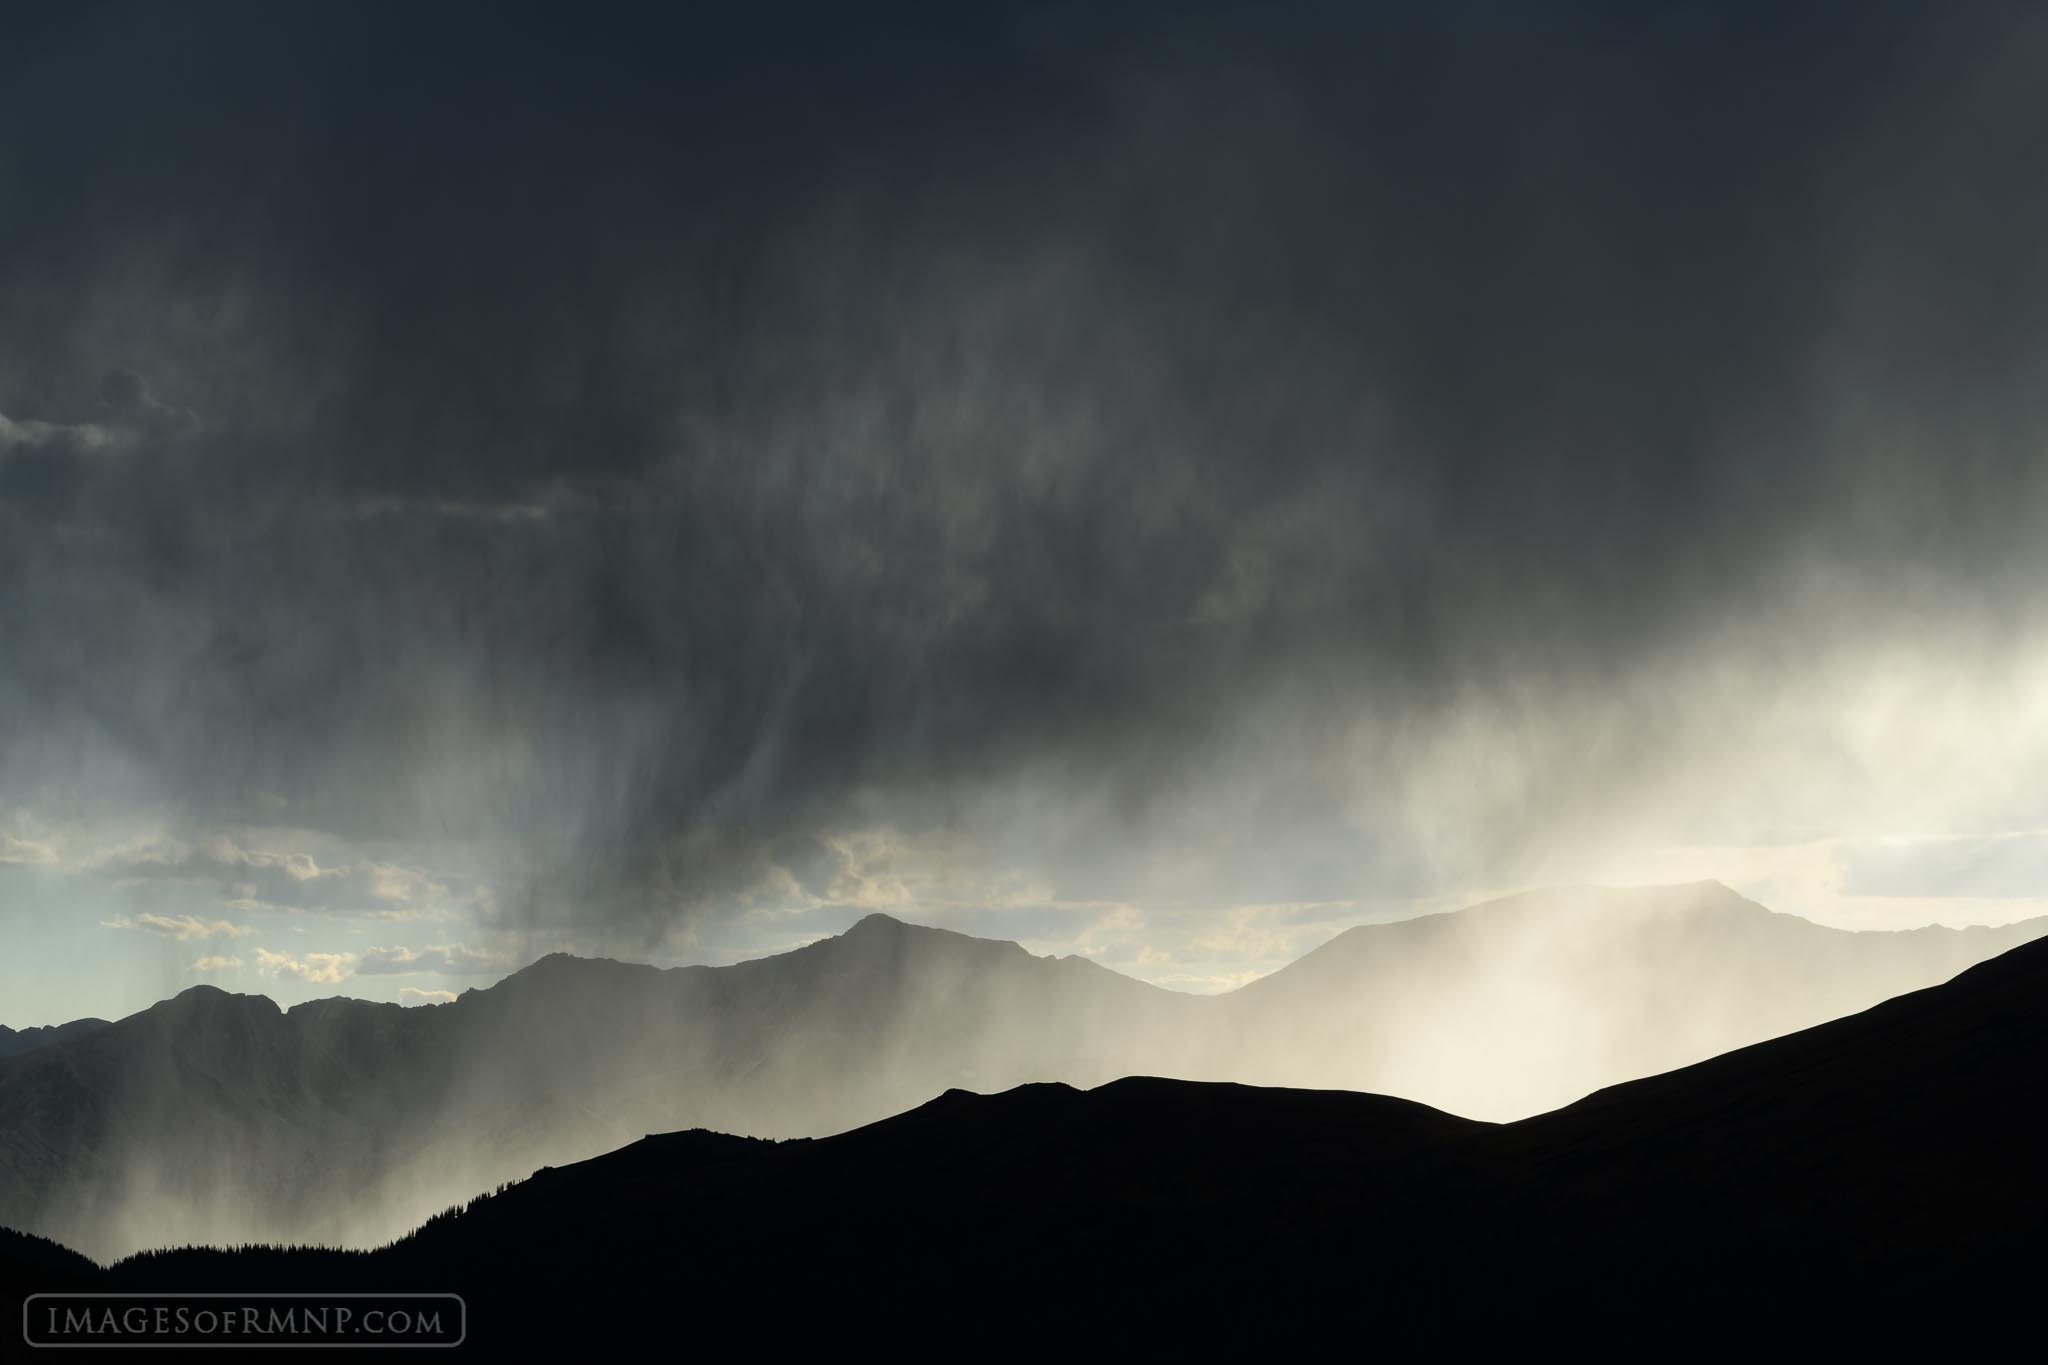 A fast moving rainstorm moves in over the Never Summer Mountains of Rocky Mountain National Park, bringing much needed moisture...